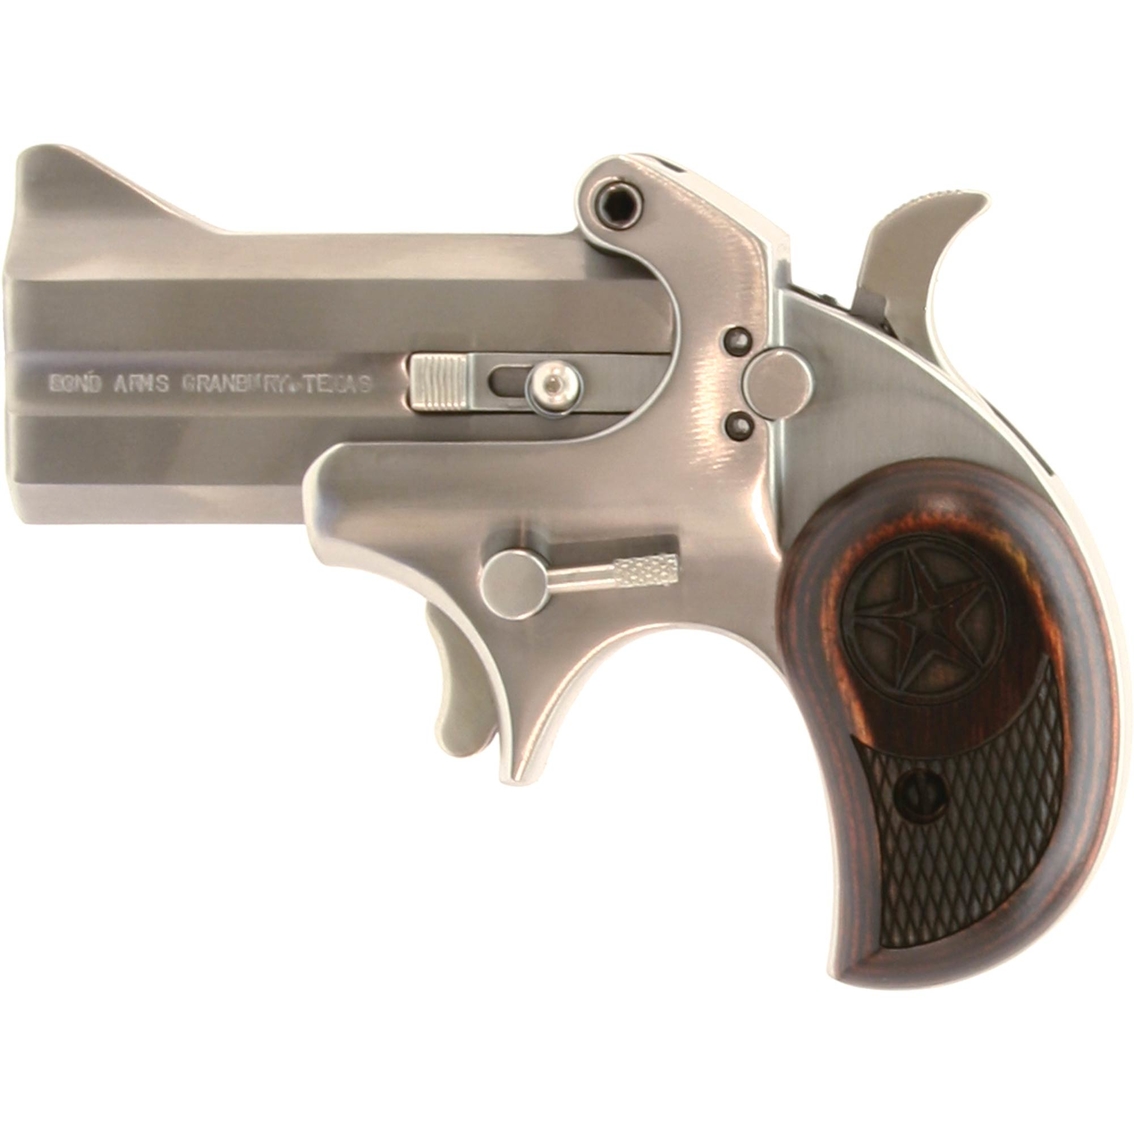 Bond Arms Cowboy Def 45 LC 410 Ga. 2.5 in. Chamber 3 in. Barrel 2 Rds Pistol SS - Image 2 of 2